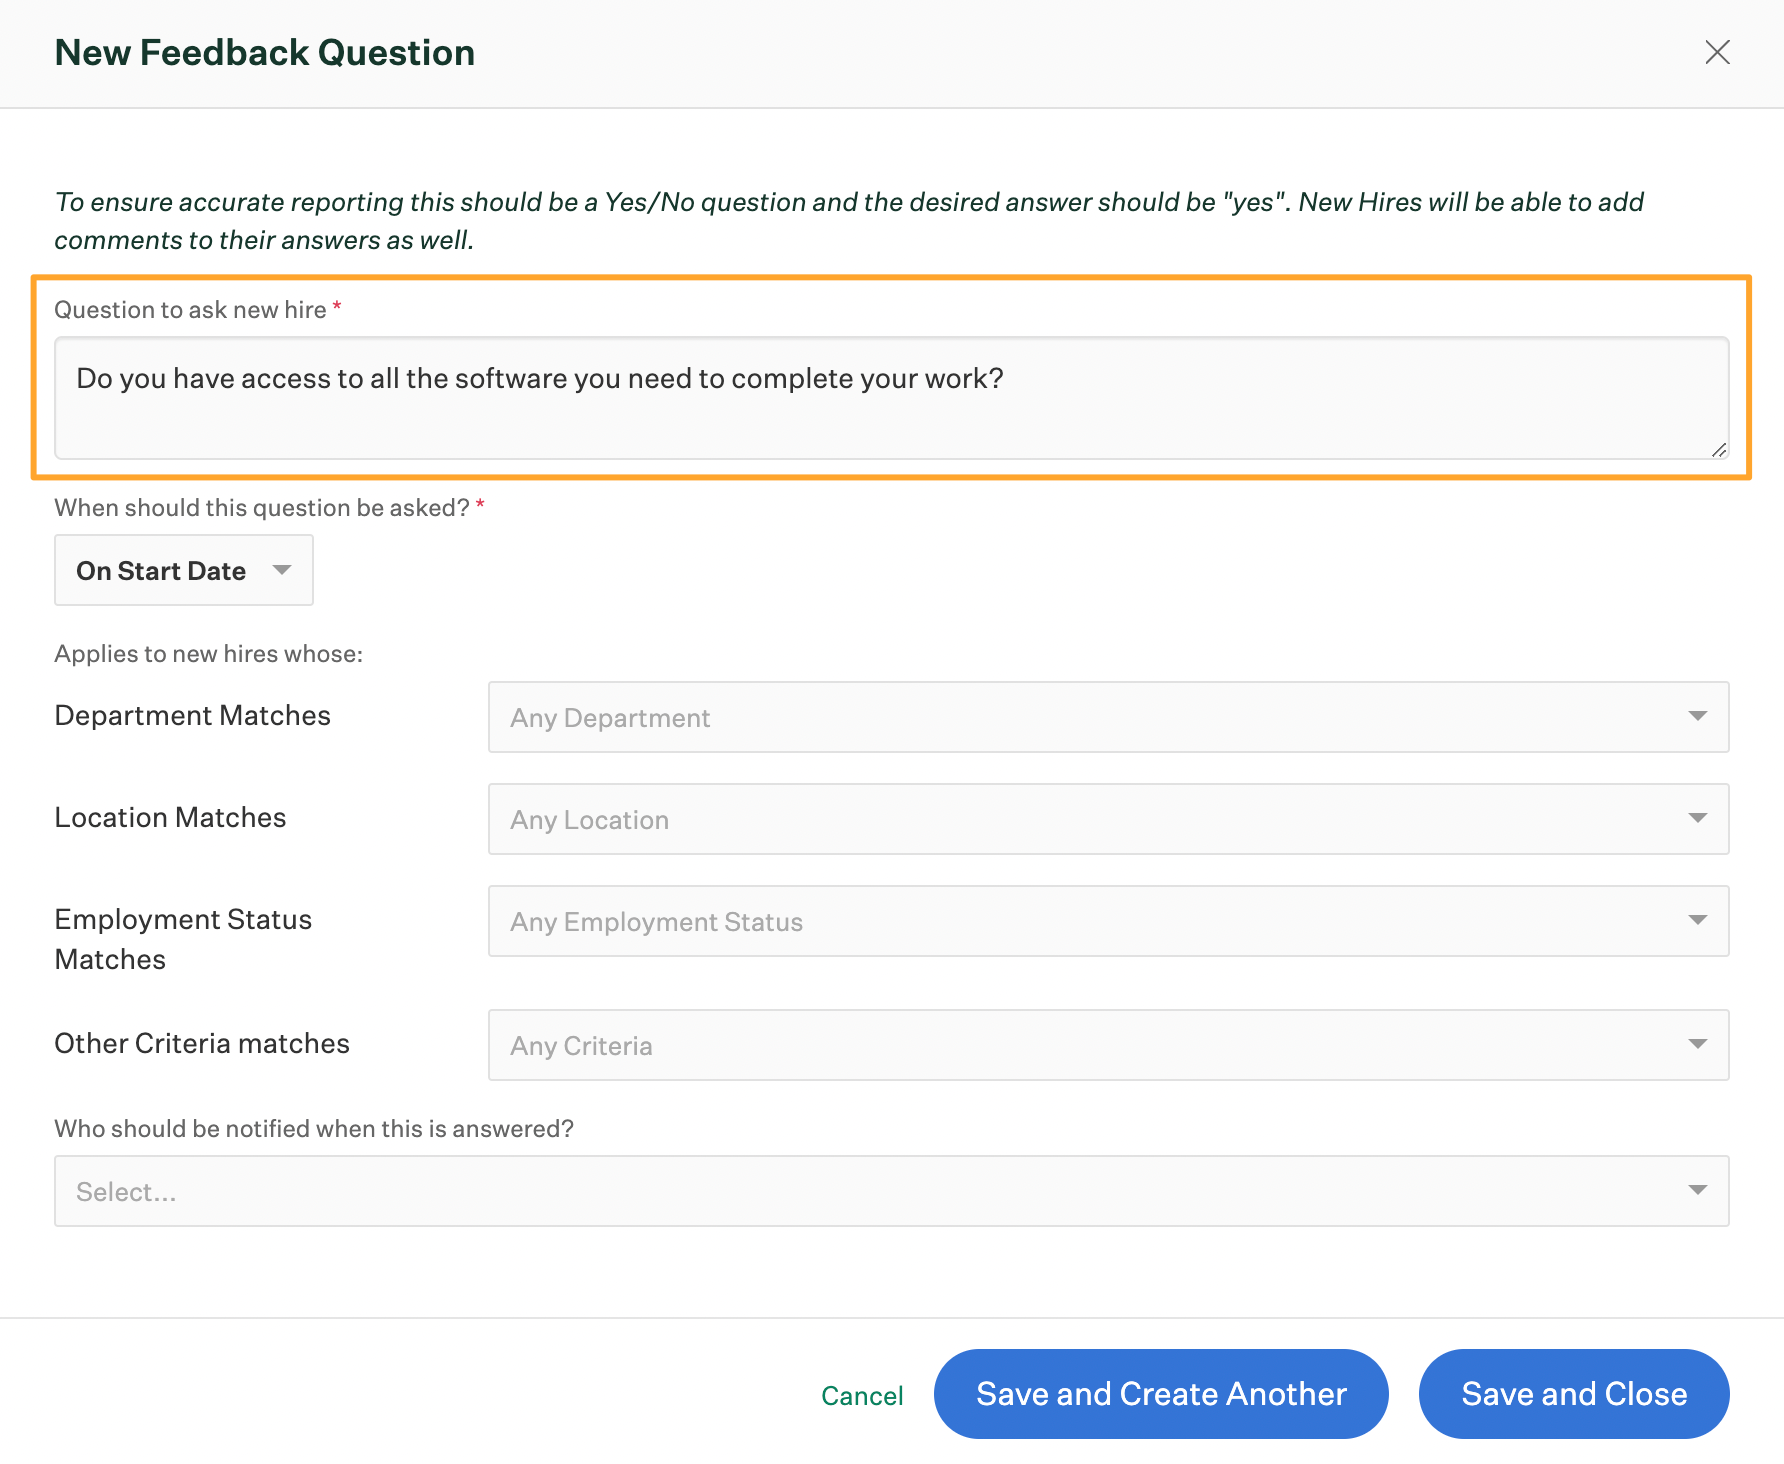 Create-new-feedback-question-window-with-question-to-ask-new-hire-field-highlighted-and-filled-out.png